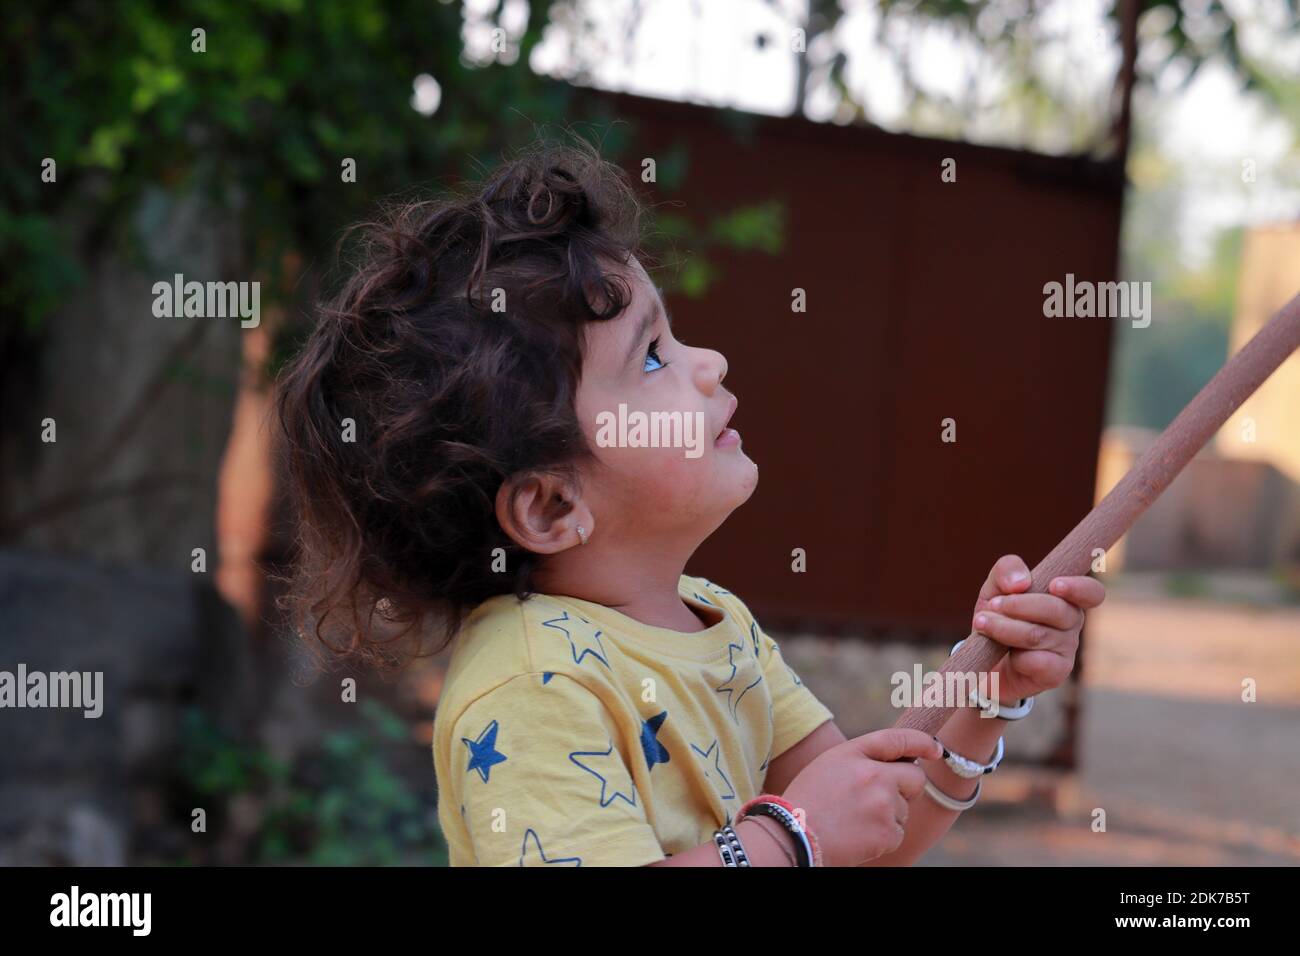 profile view of A little child holding a wooden stick and looking at it Stock Photo